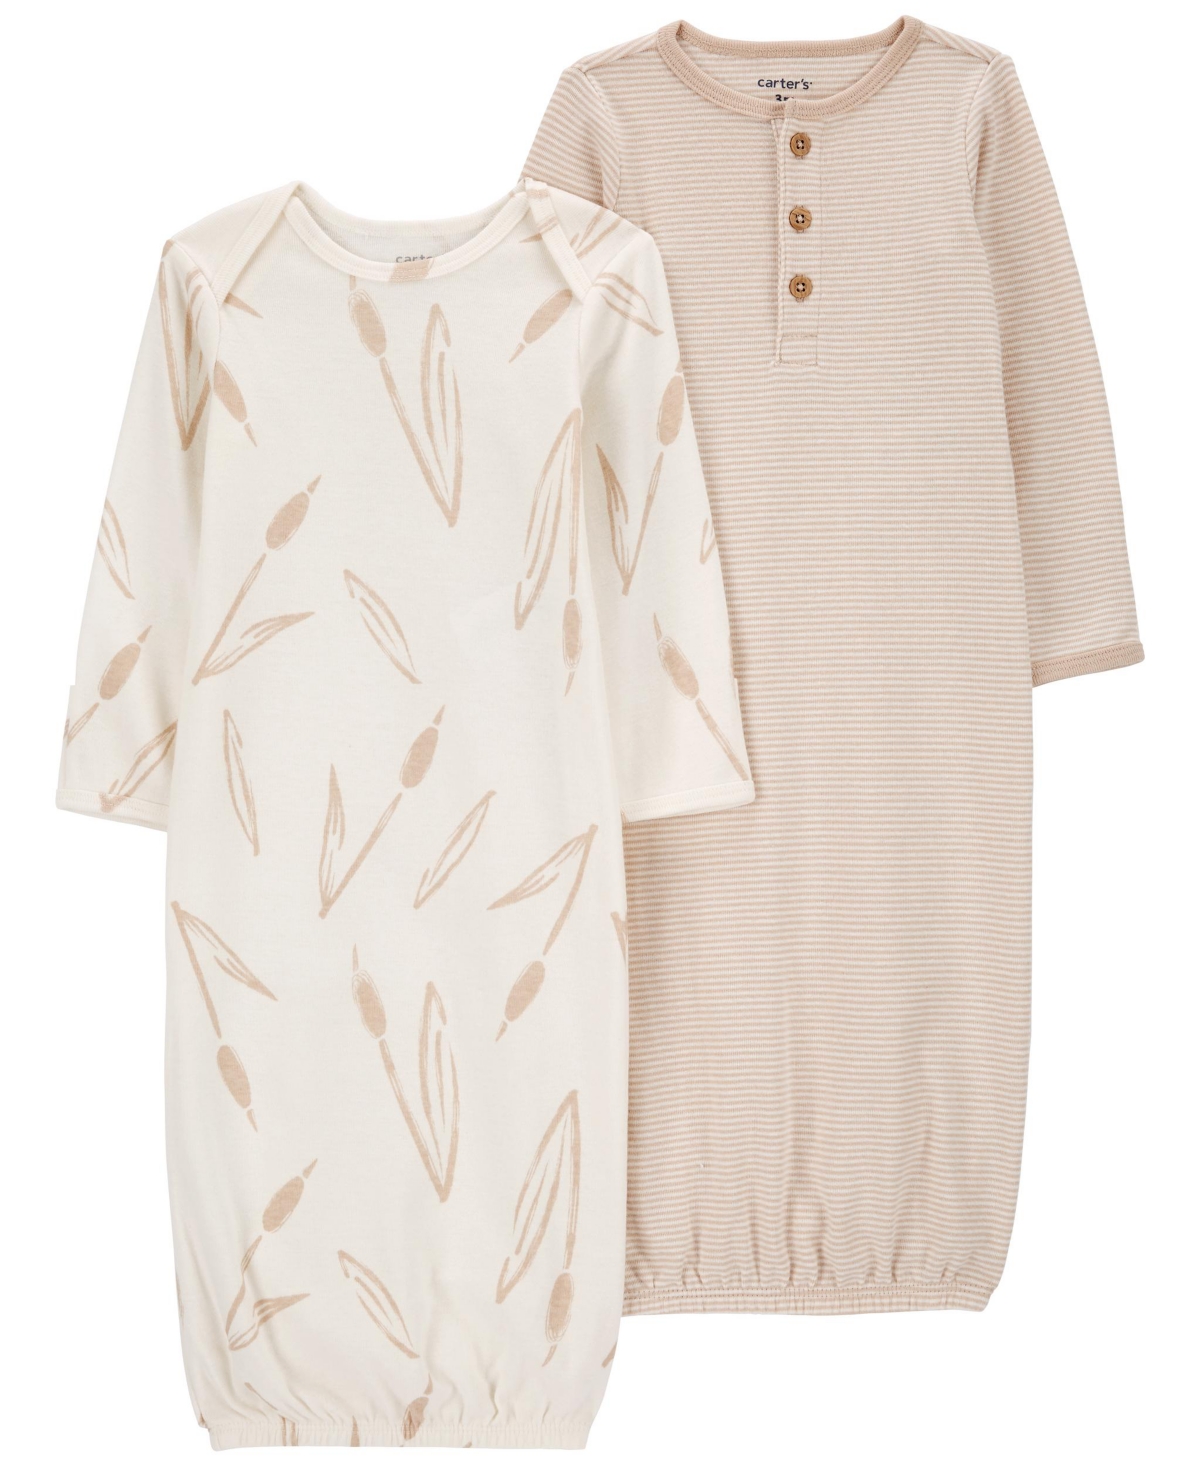 Carter's Kids' Baby Boys Or Baby Girls Sleeper Gowns, Pack Of 2 In Neutral